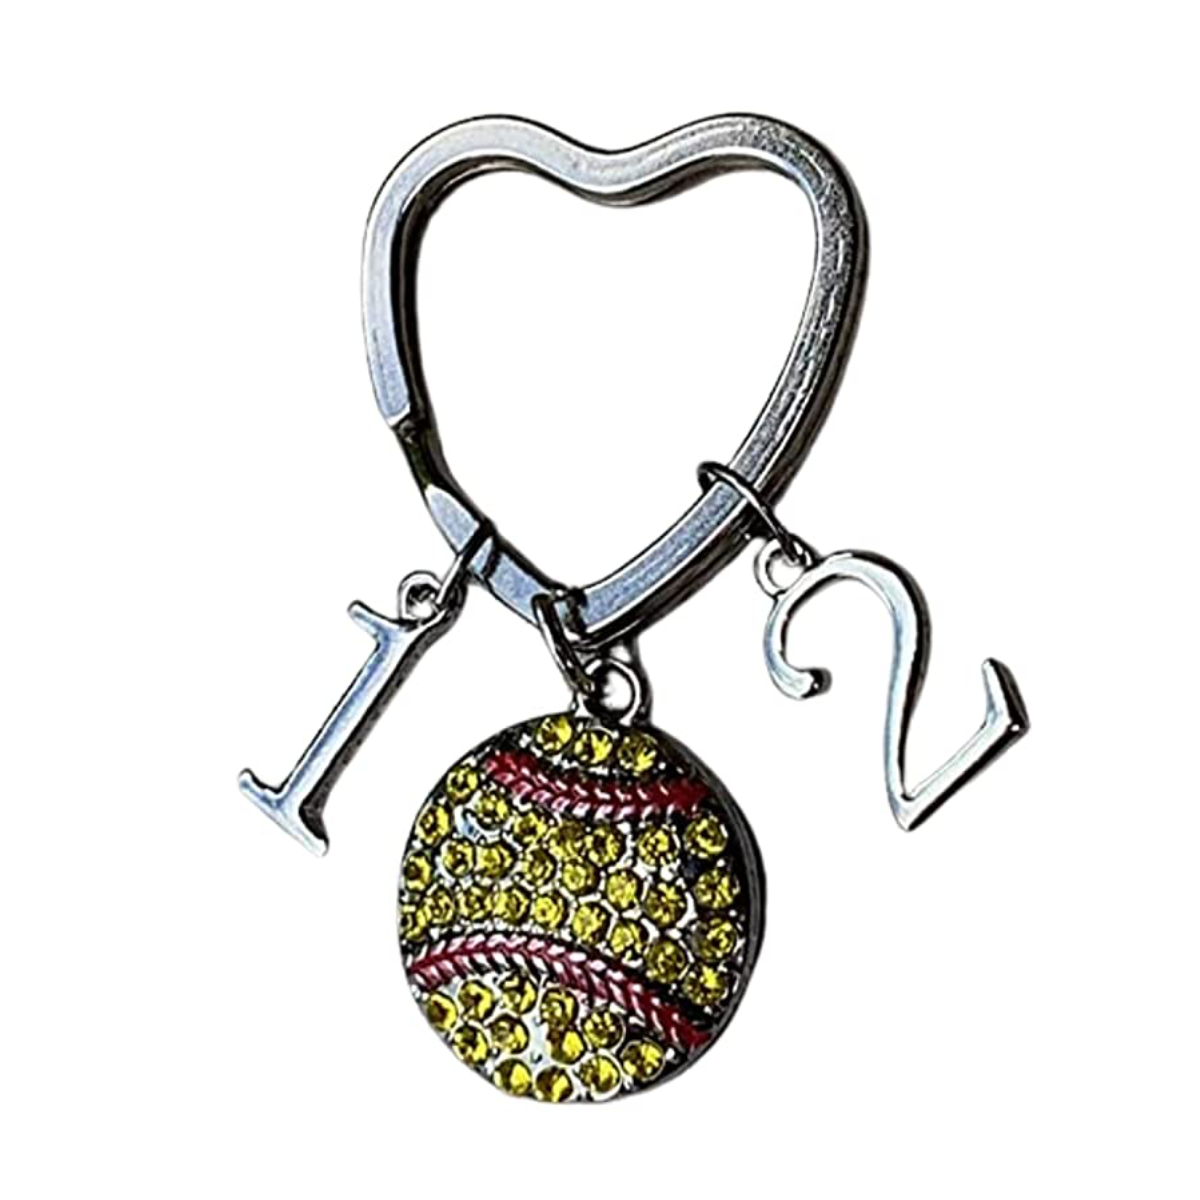 Personalized Softball Heart Keychain - Number Charms